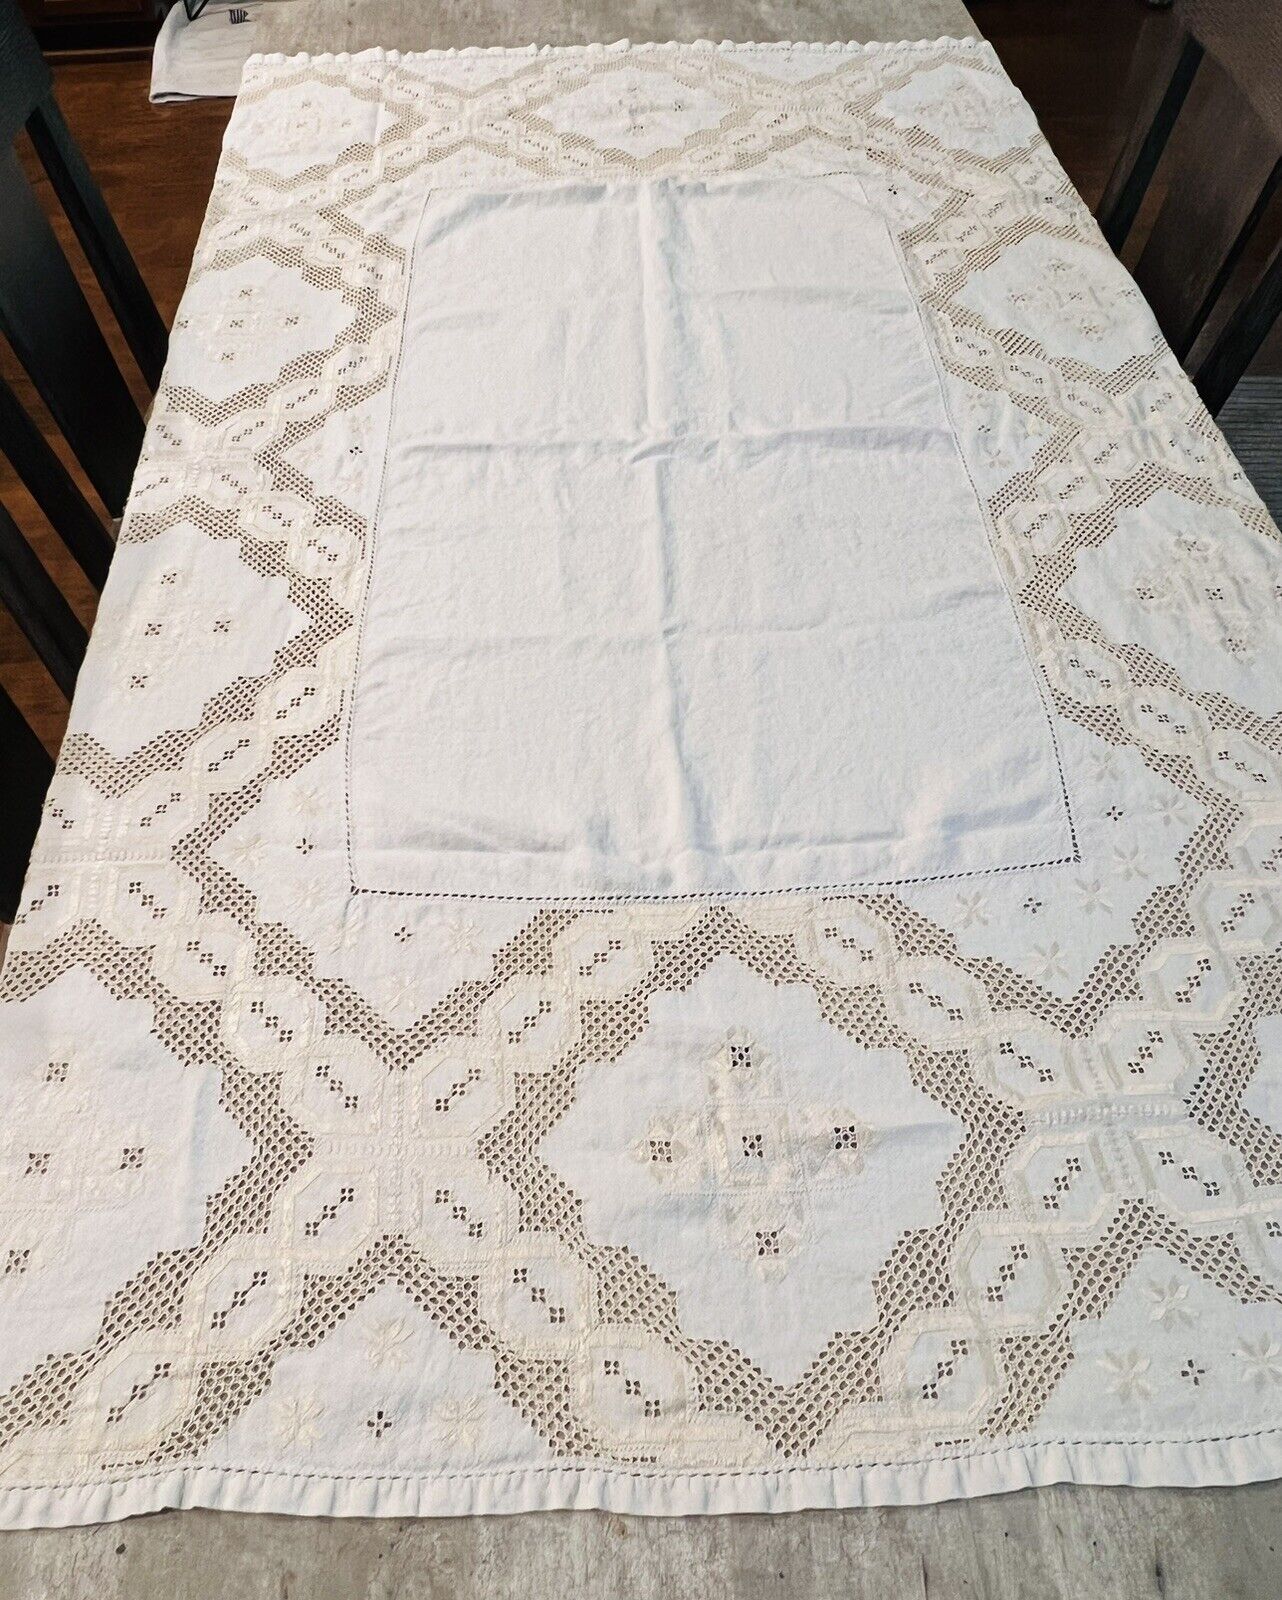 Vintage Embroidery And Crochet Linen Tablecloth In Antique White - 68 x 48